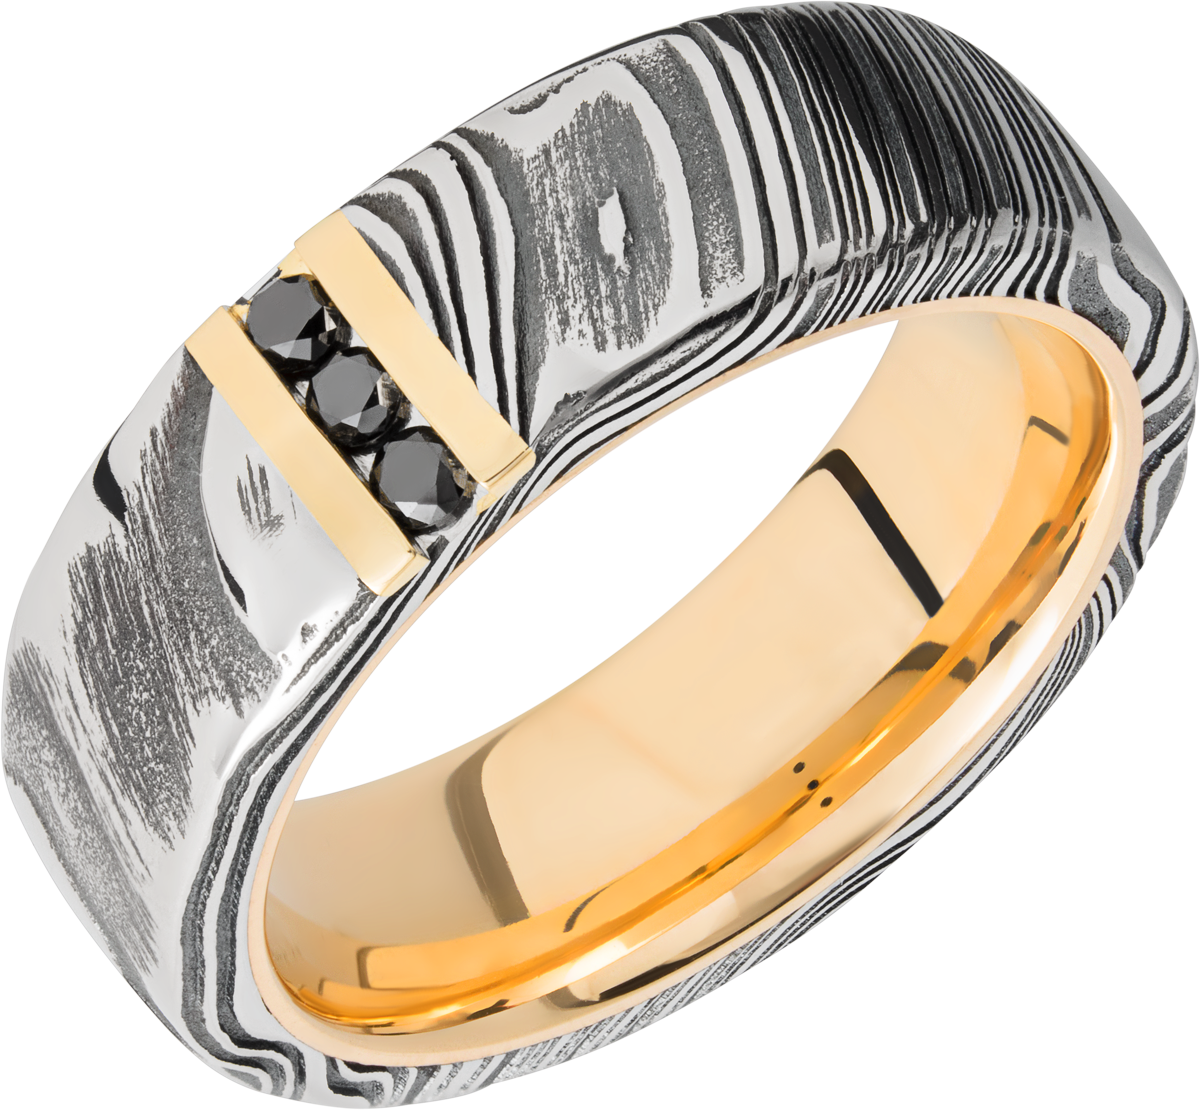 Damascus steel woodgrain band that is 8mm wide flat band with a  14 karat yellow gold inside sleeve